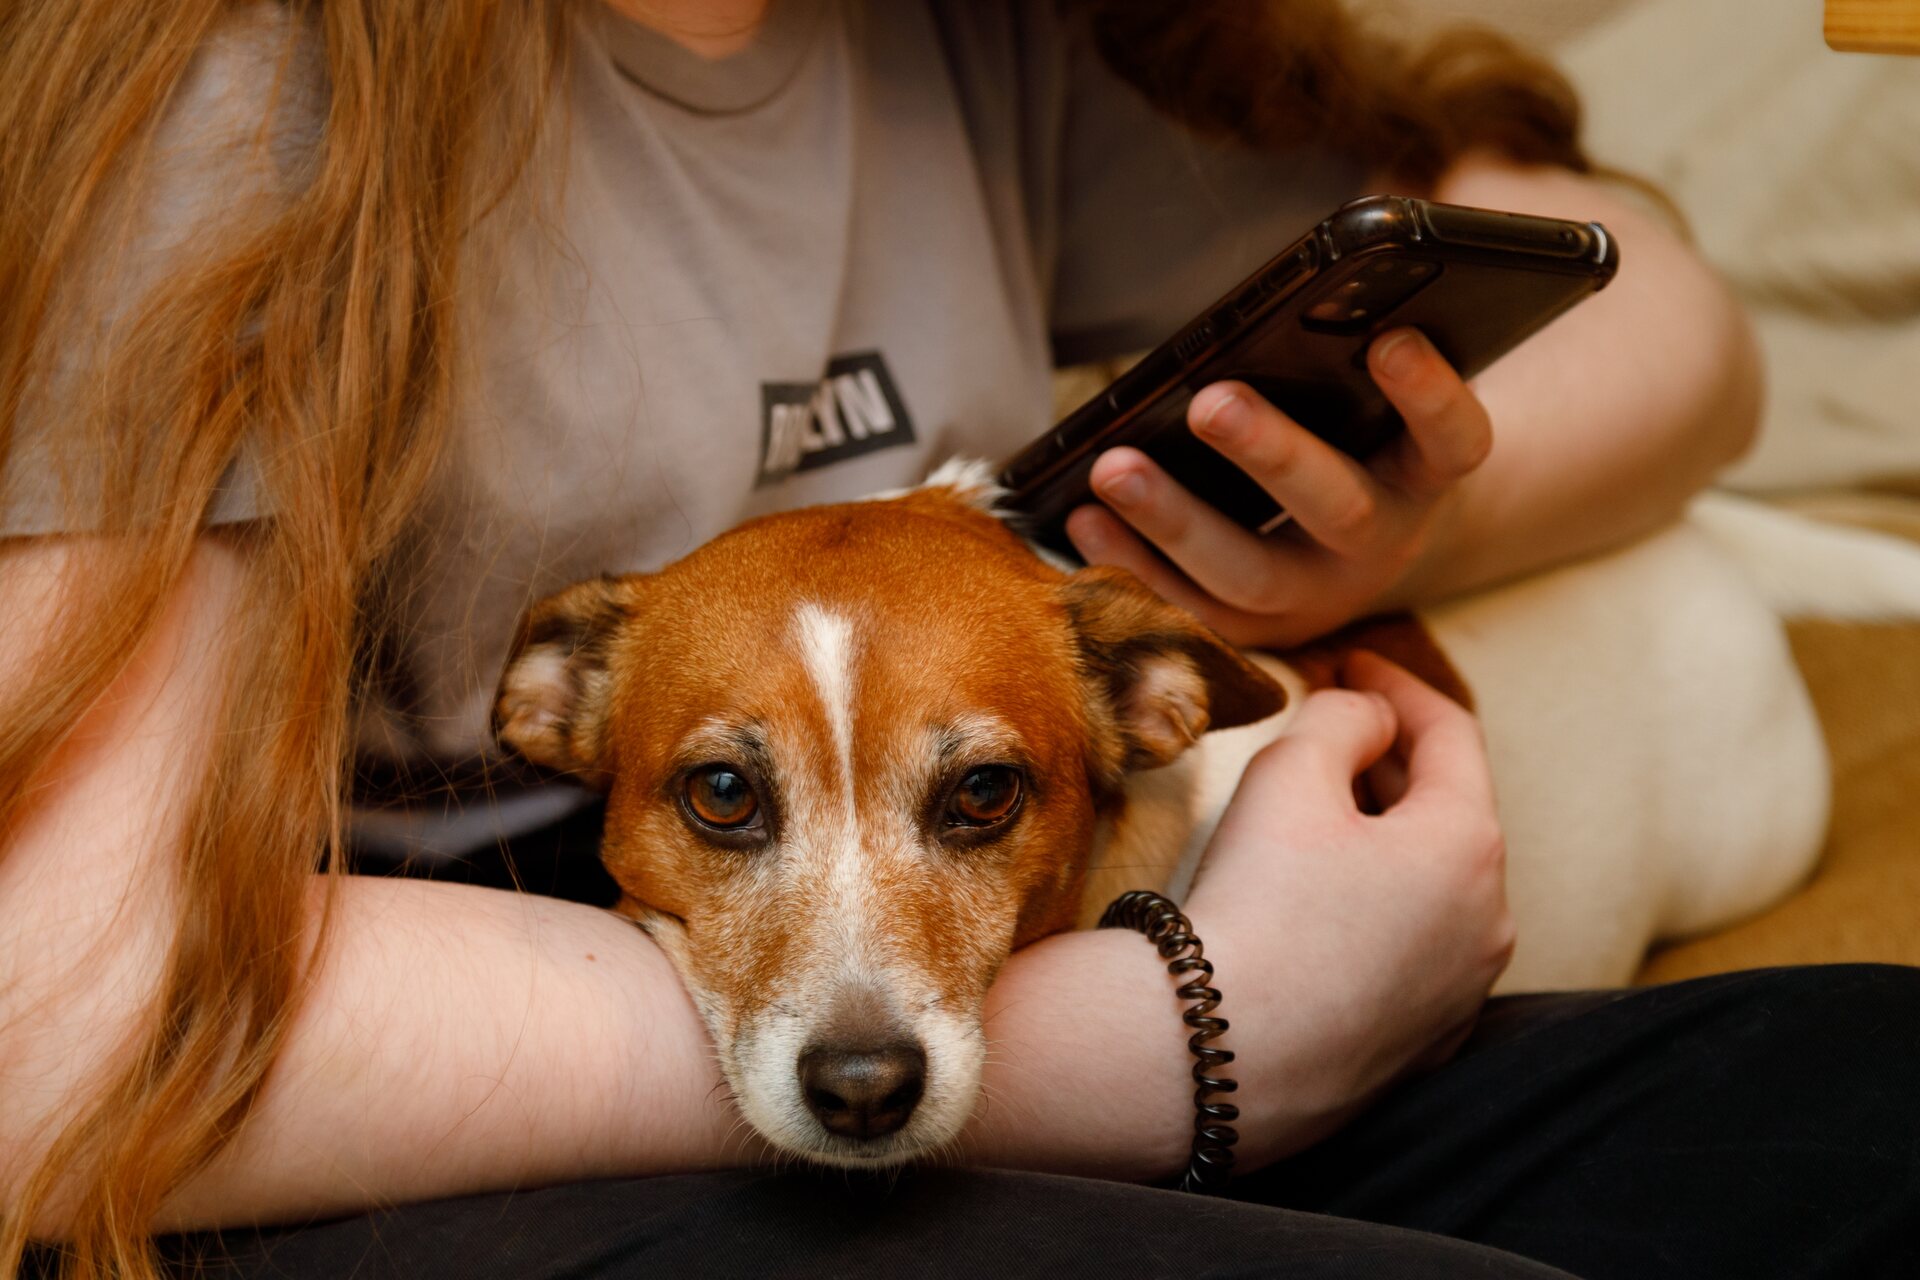 A woman cuddling her dog while checking her phone